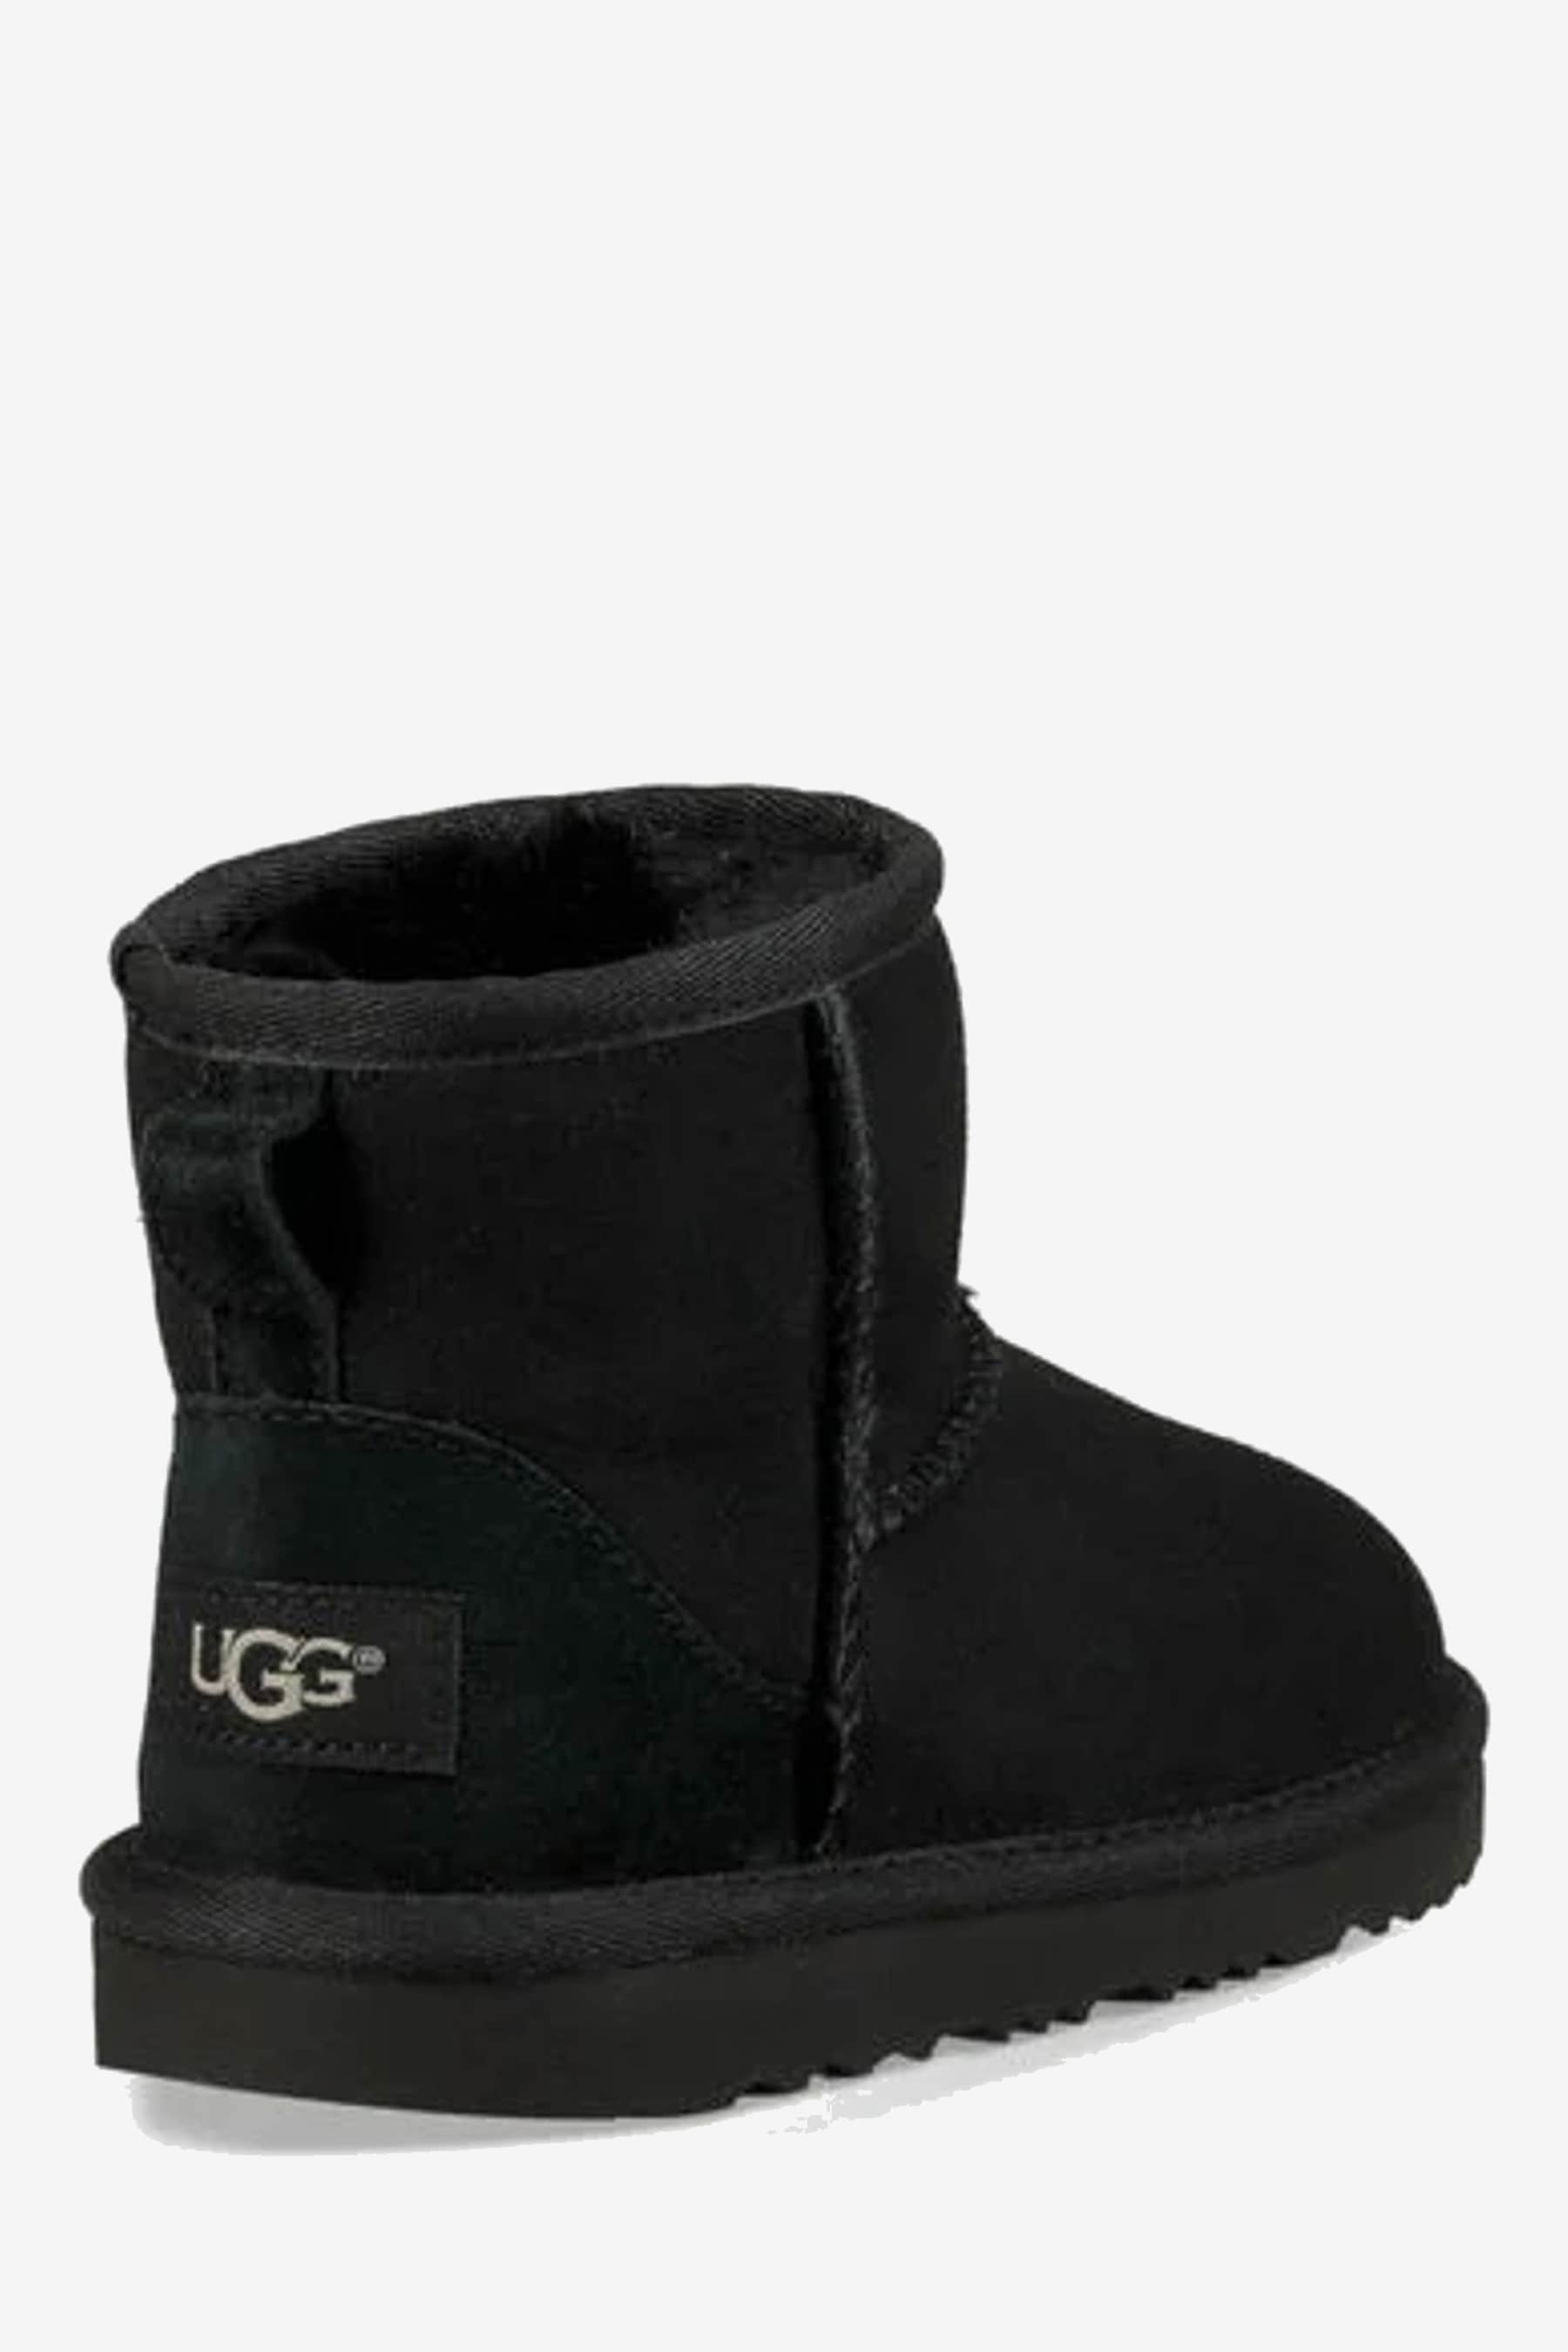 Buy UGG Kids Classic Mini Boots from the Next UK online shop